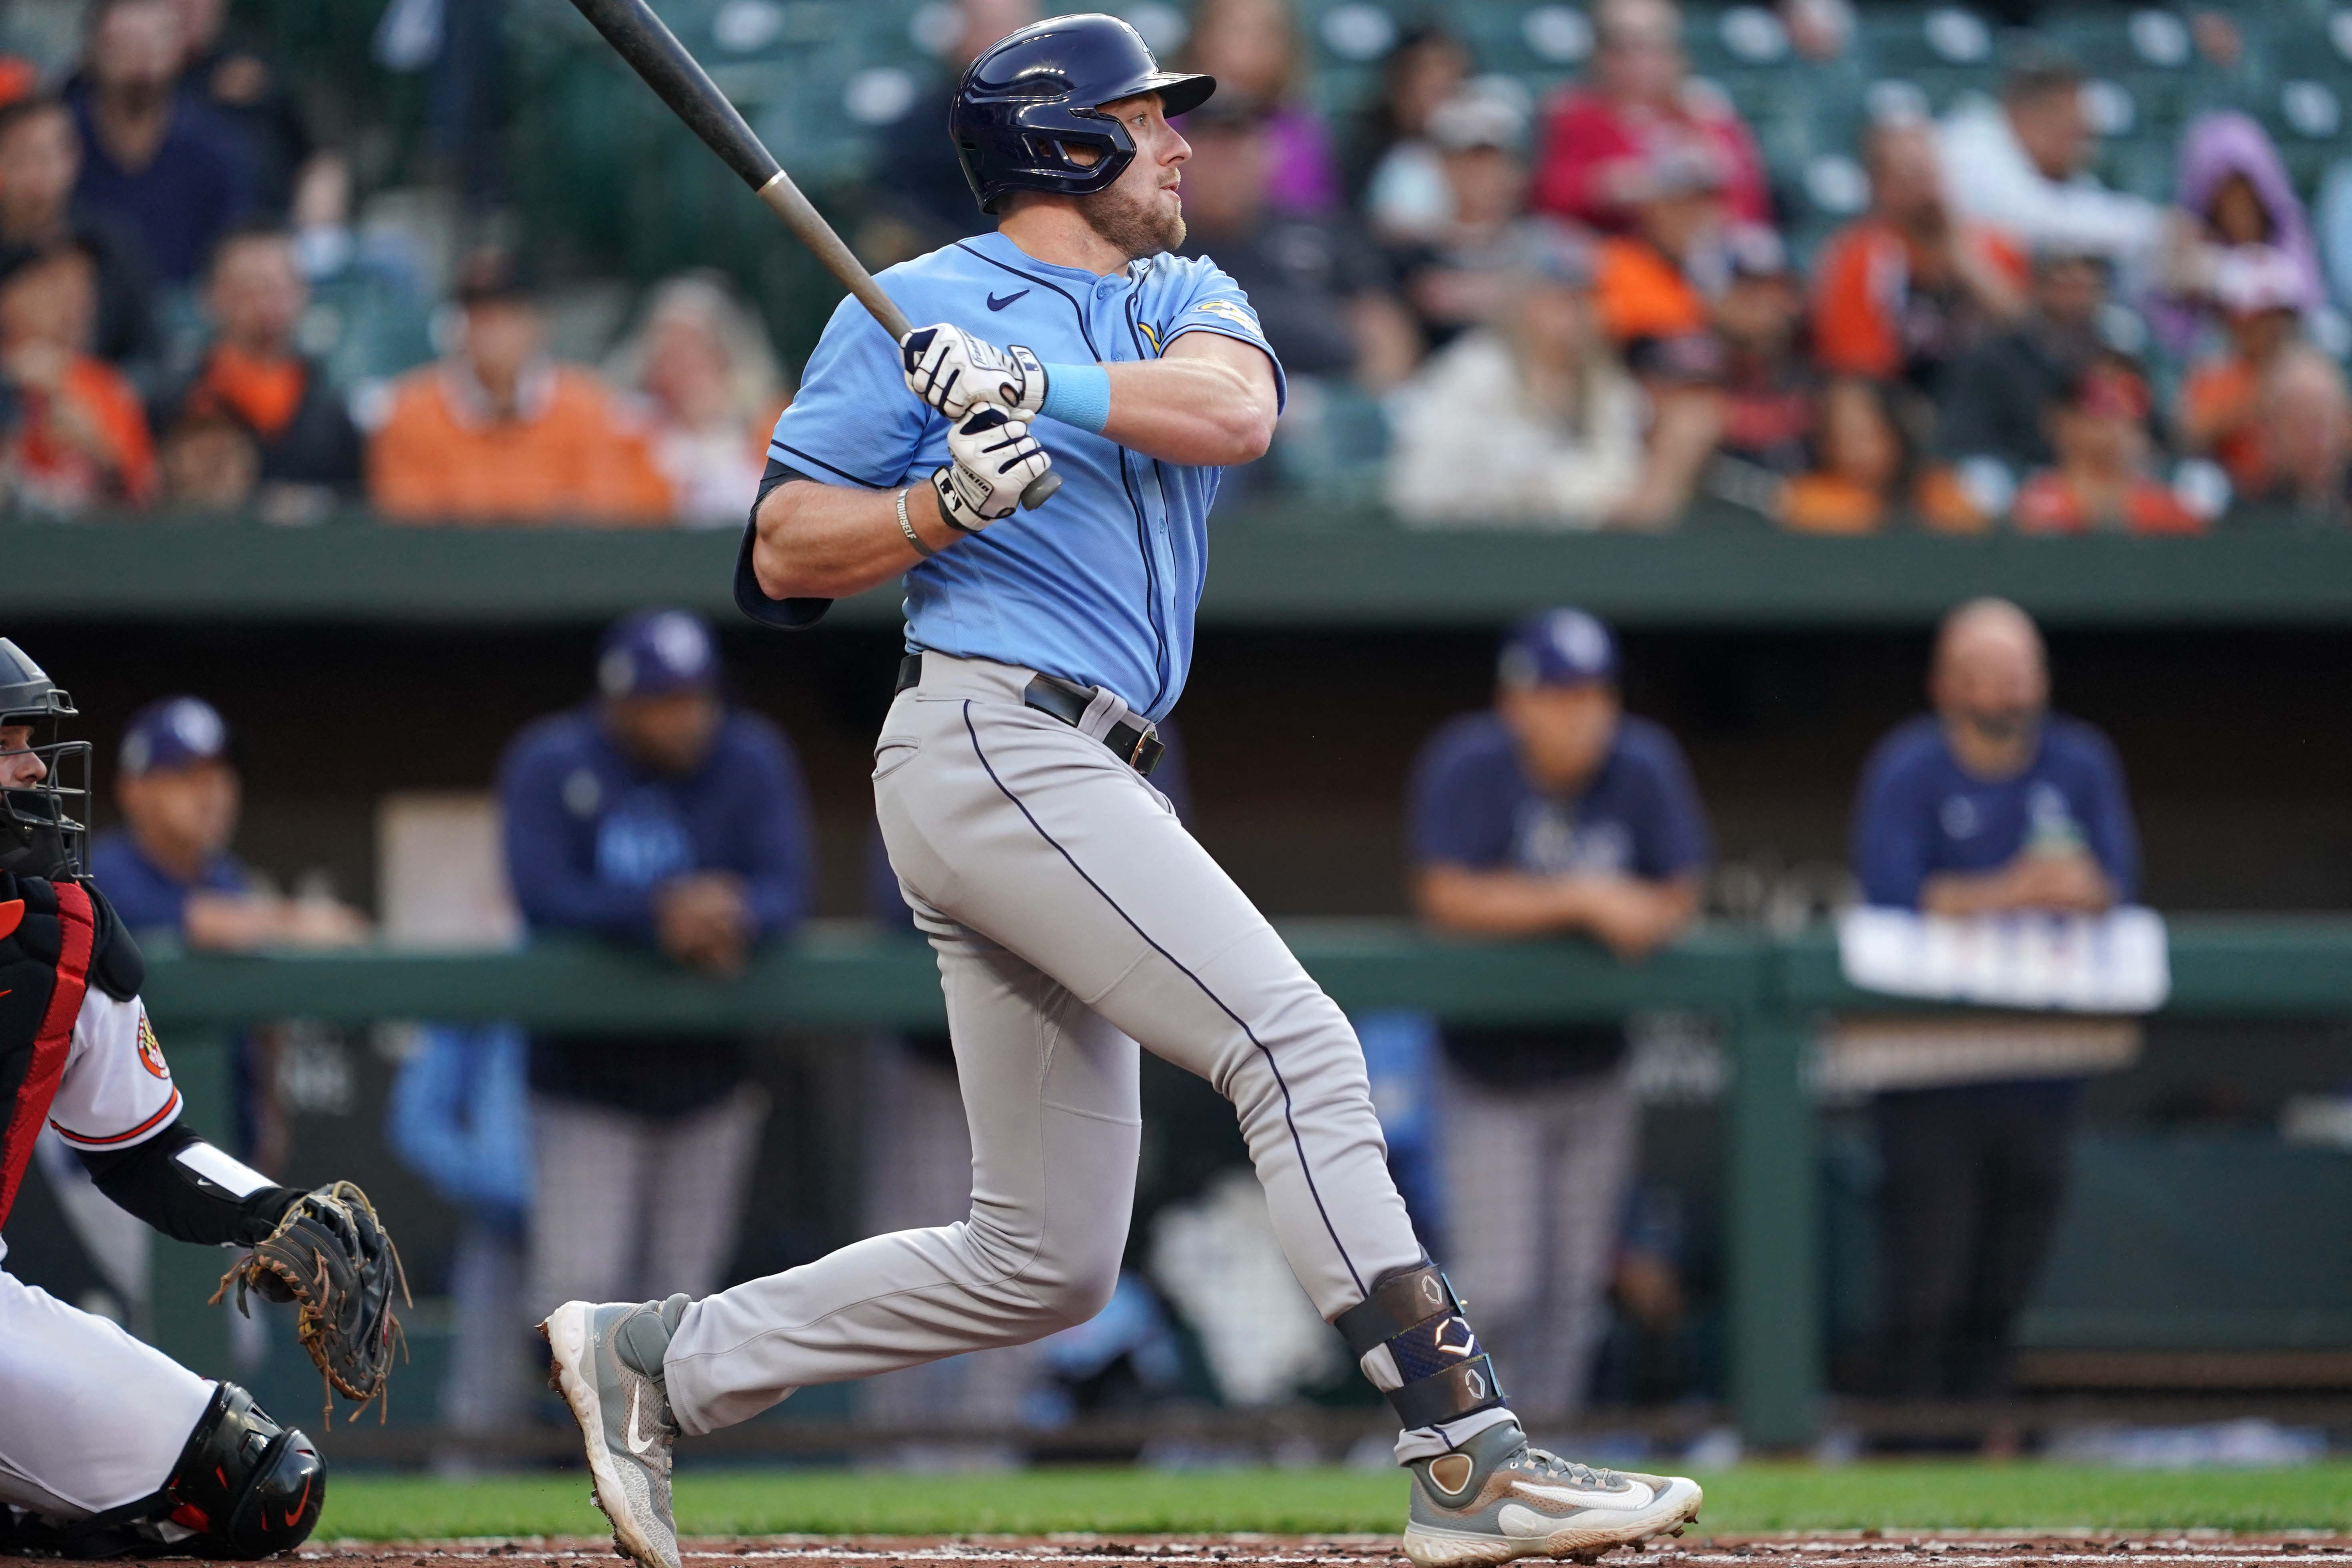 Mountcastle, Rutschman and O's end Trop skid, top Tampa Bay Rays in 11